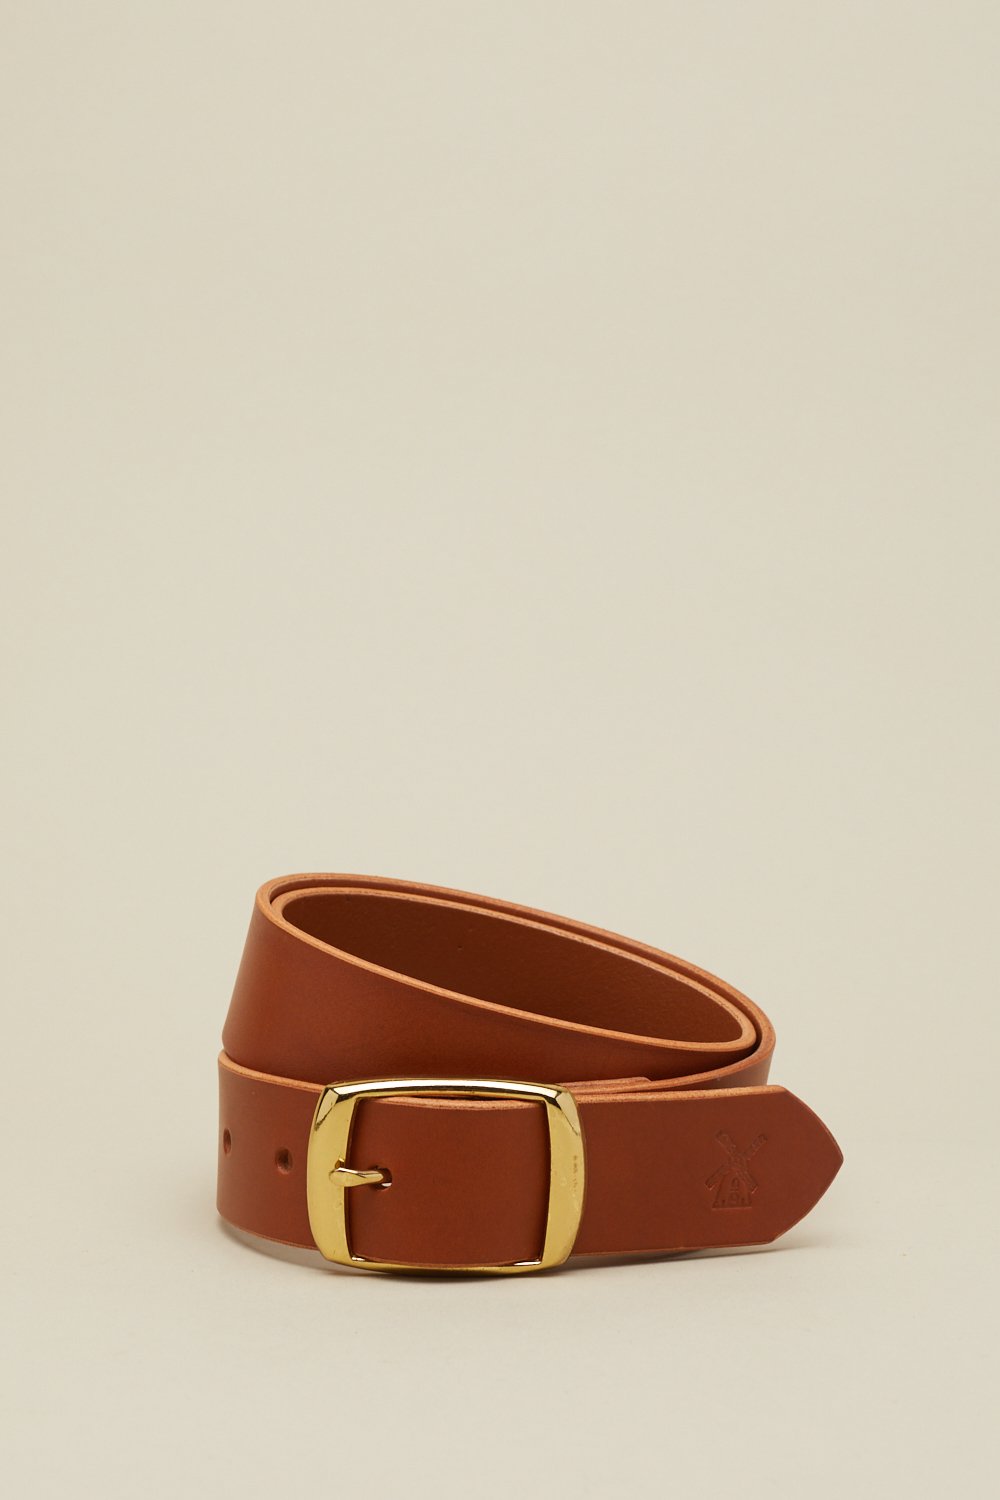 Image of Square Buckle in Tan